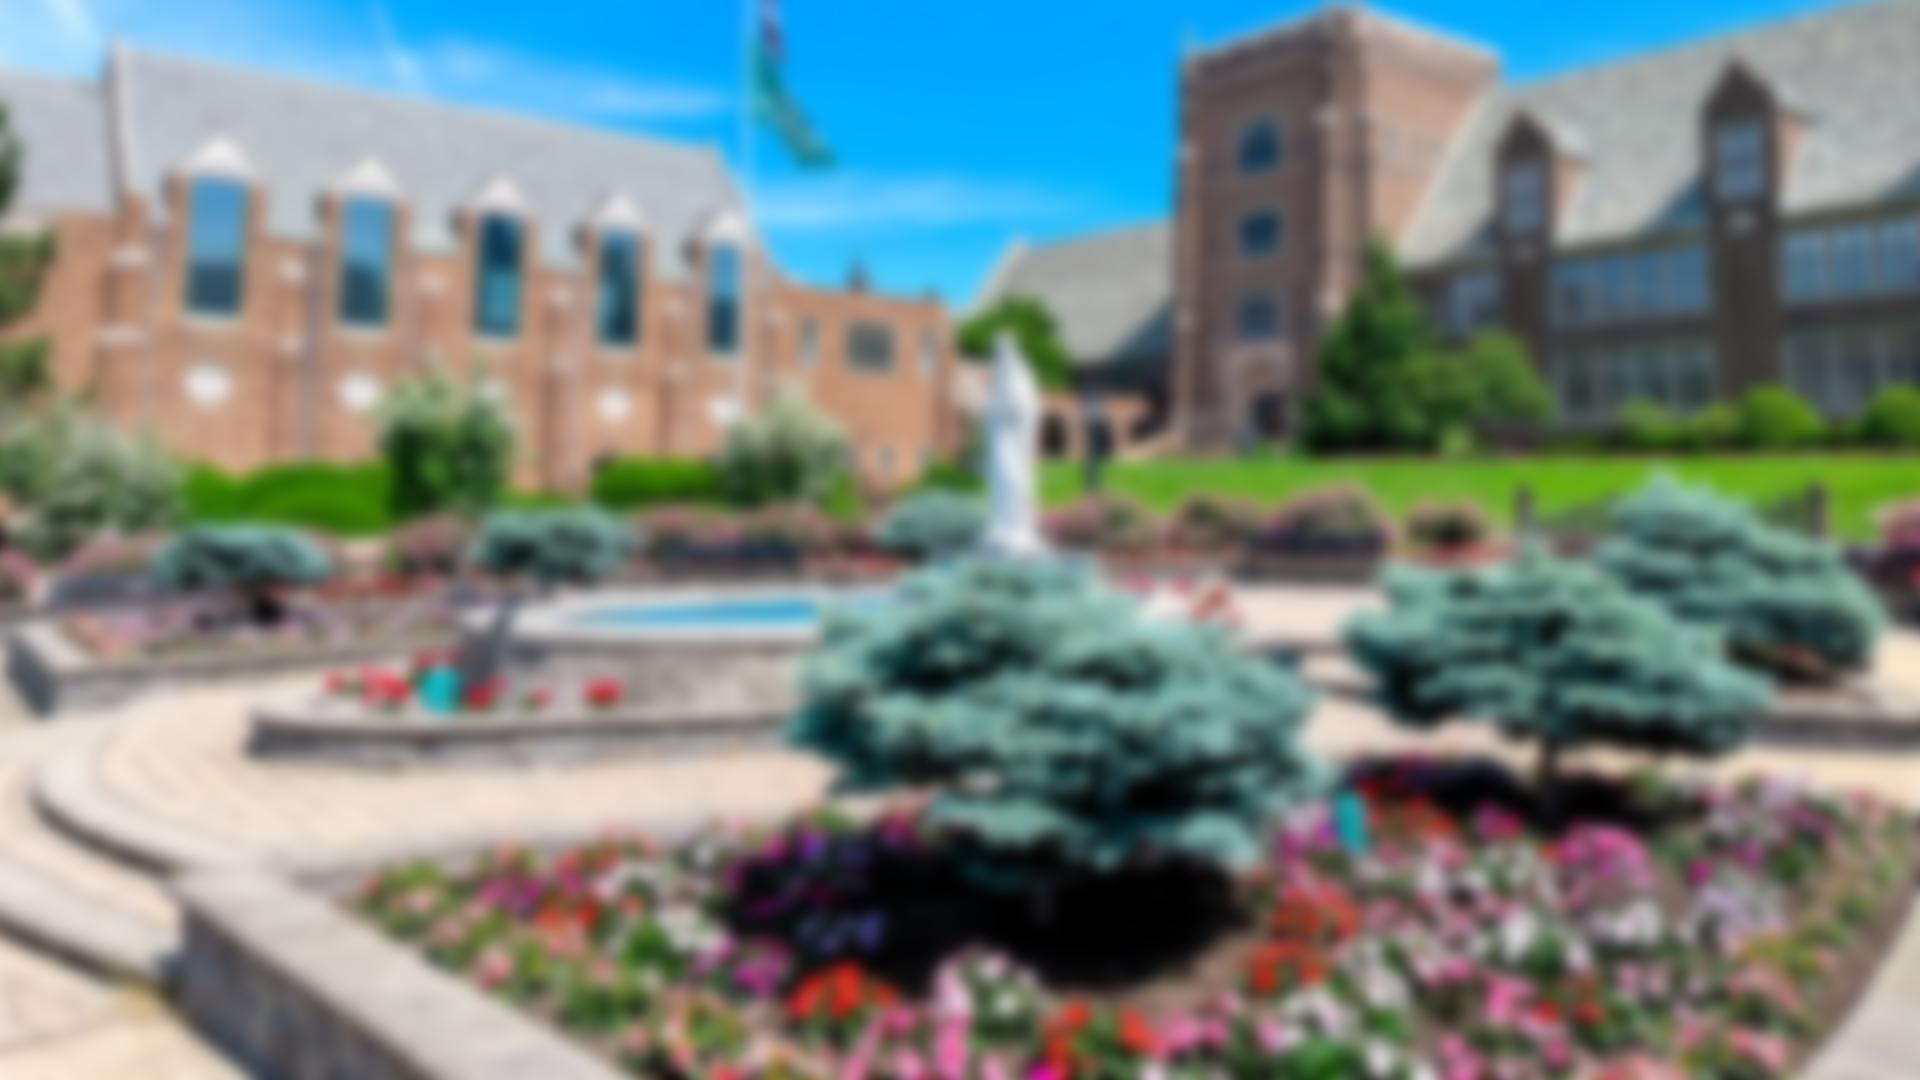 Blurred image of mary garden and old main